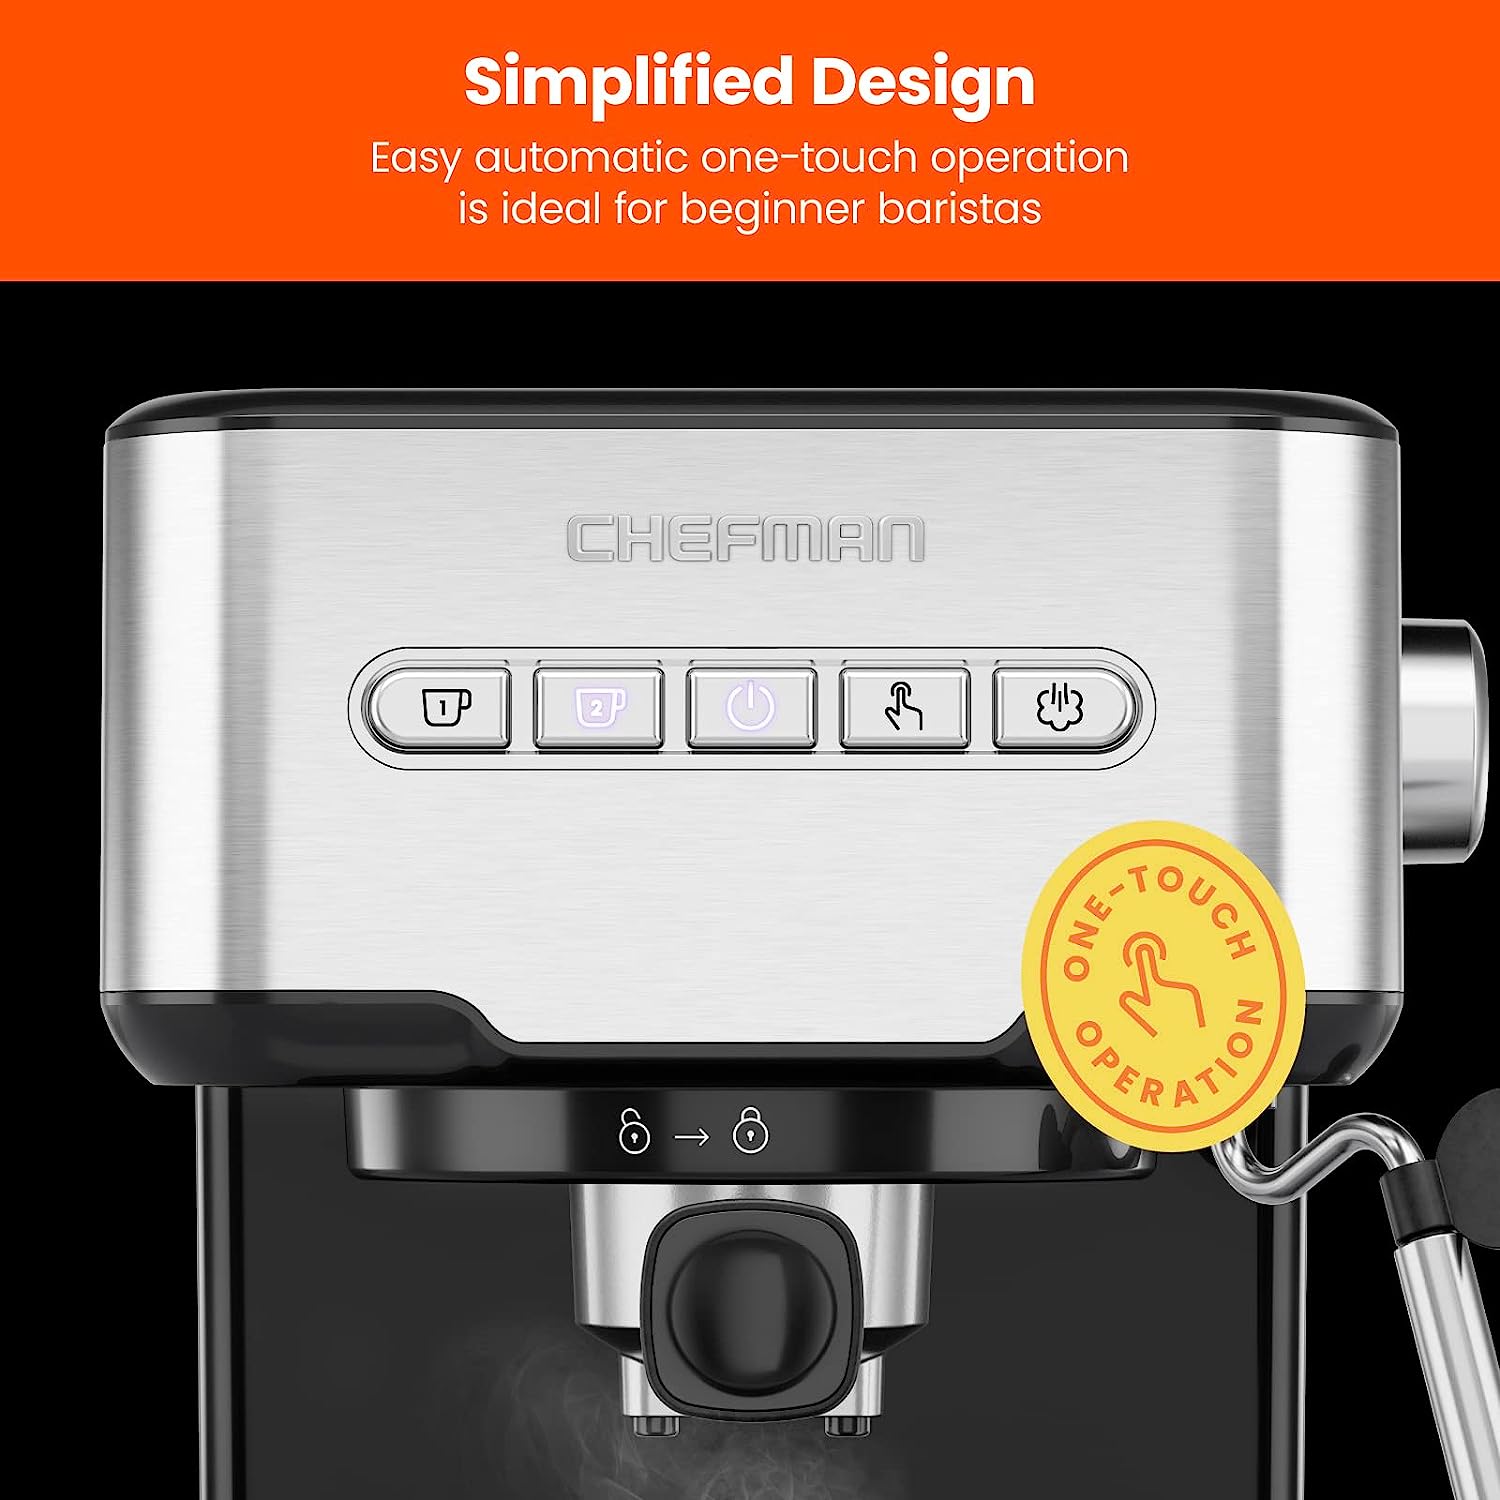 https://bigbigmart.com/wp-content/uploads/2023/07/Chefman-6-in-1-Espresso-Machine-with-Steamer-One-Touch-Single-or-Double-Shot-Espresso-Maker-Coffee-Maker-Cappuccino-Machine-Latte-Maker-Built-In-Milk-Frother-Coffee-Machine-Stainless-Steel8.jpg